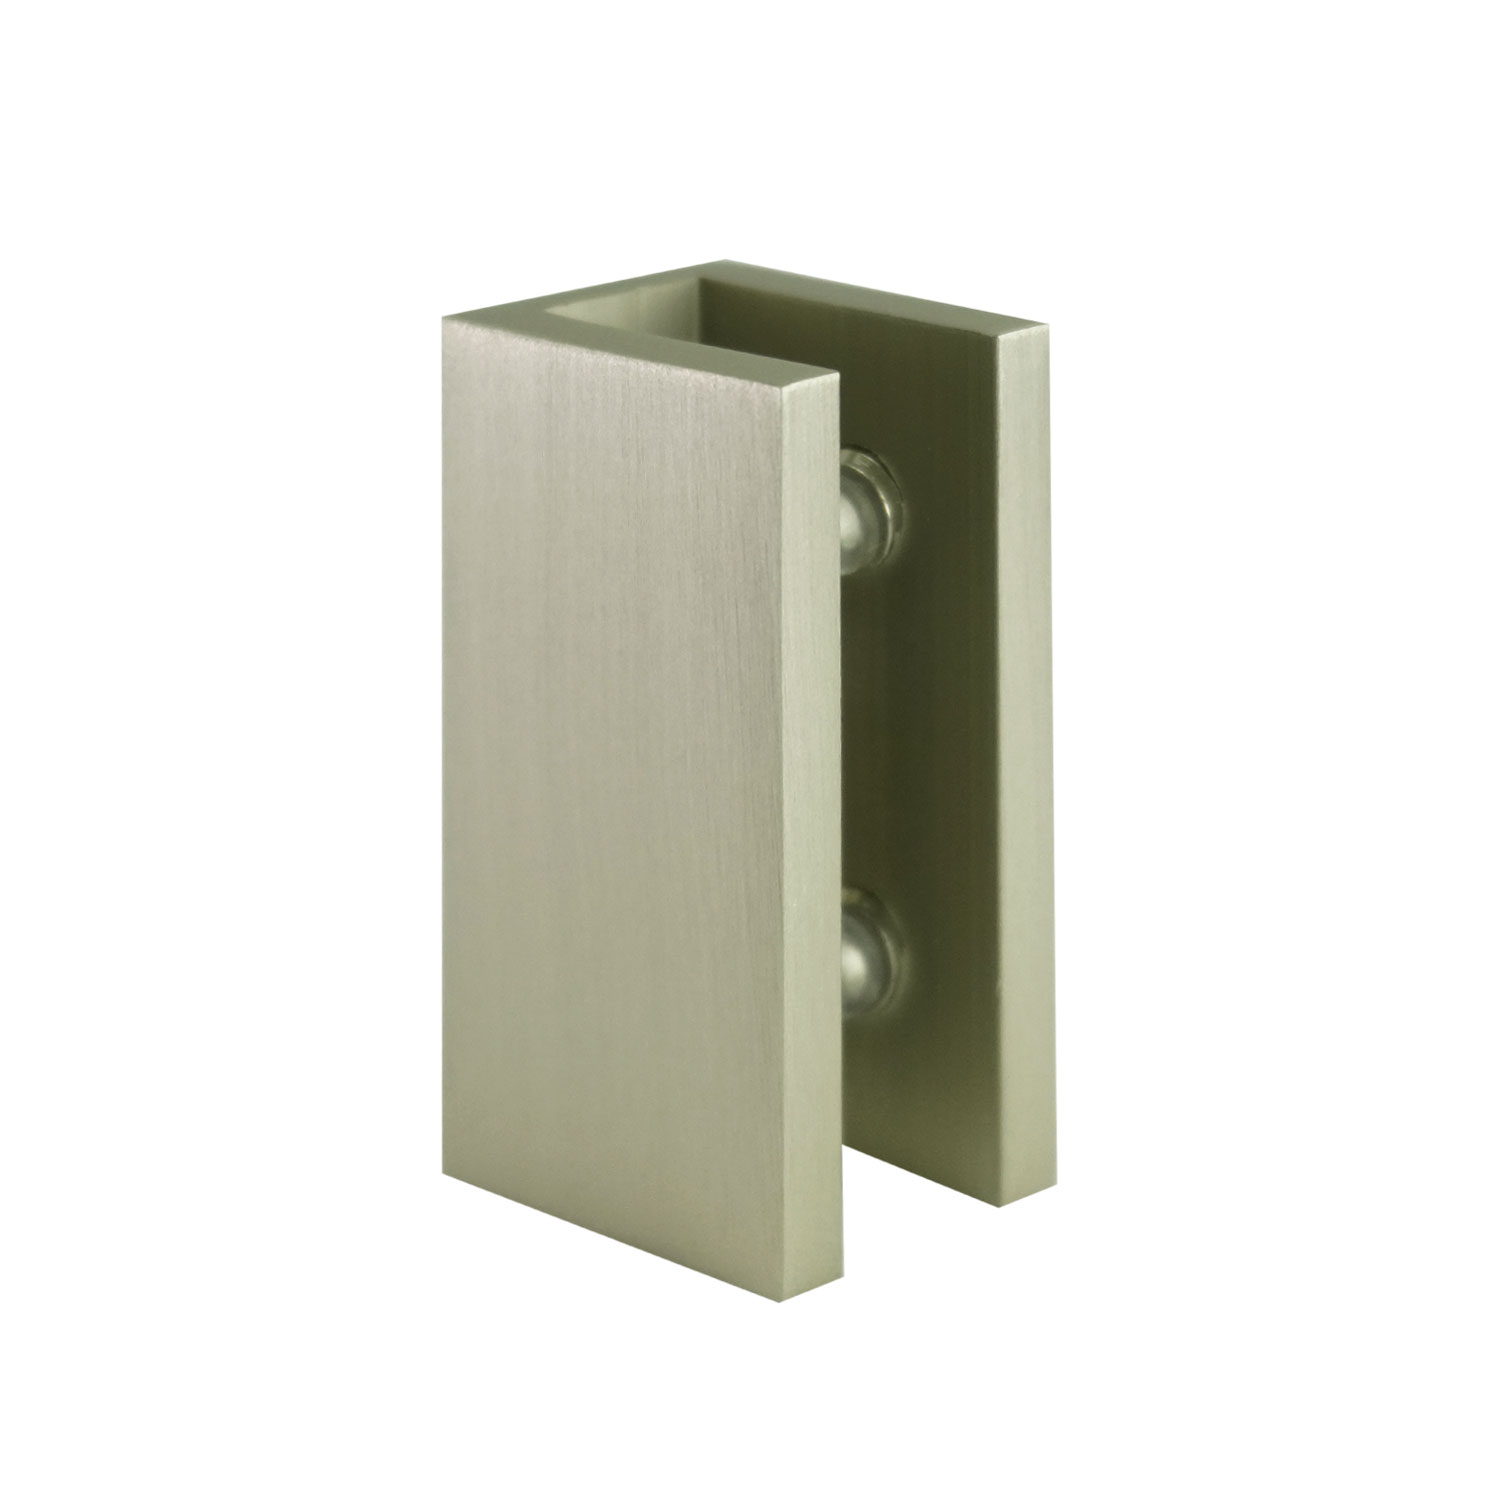 Glass to Wall/Floor U-Clamp 25mm x 50mm - Square Series - (Brushed Nickel)